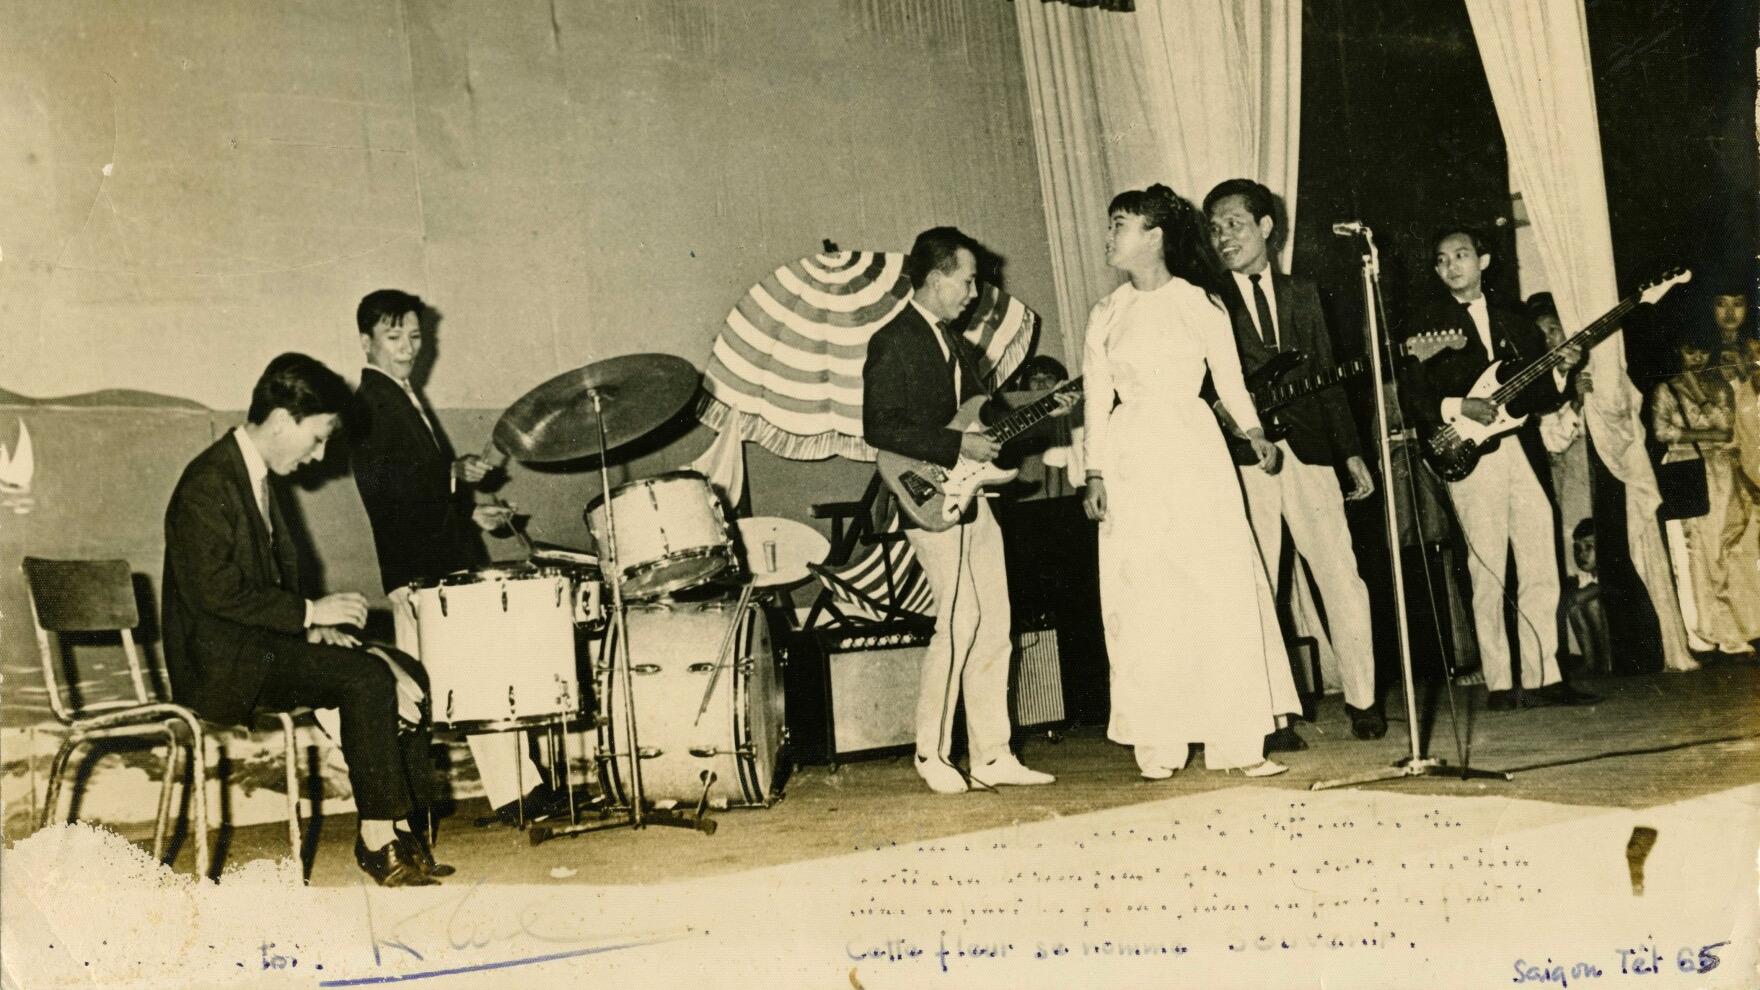 Phương Tâm performs at the Miss Vietnam Beauty Pageant with the Khanh Bang band at the Hung Dao Theatre in Saigon in 1965.